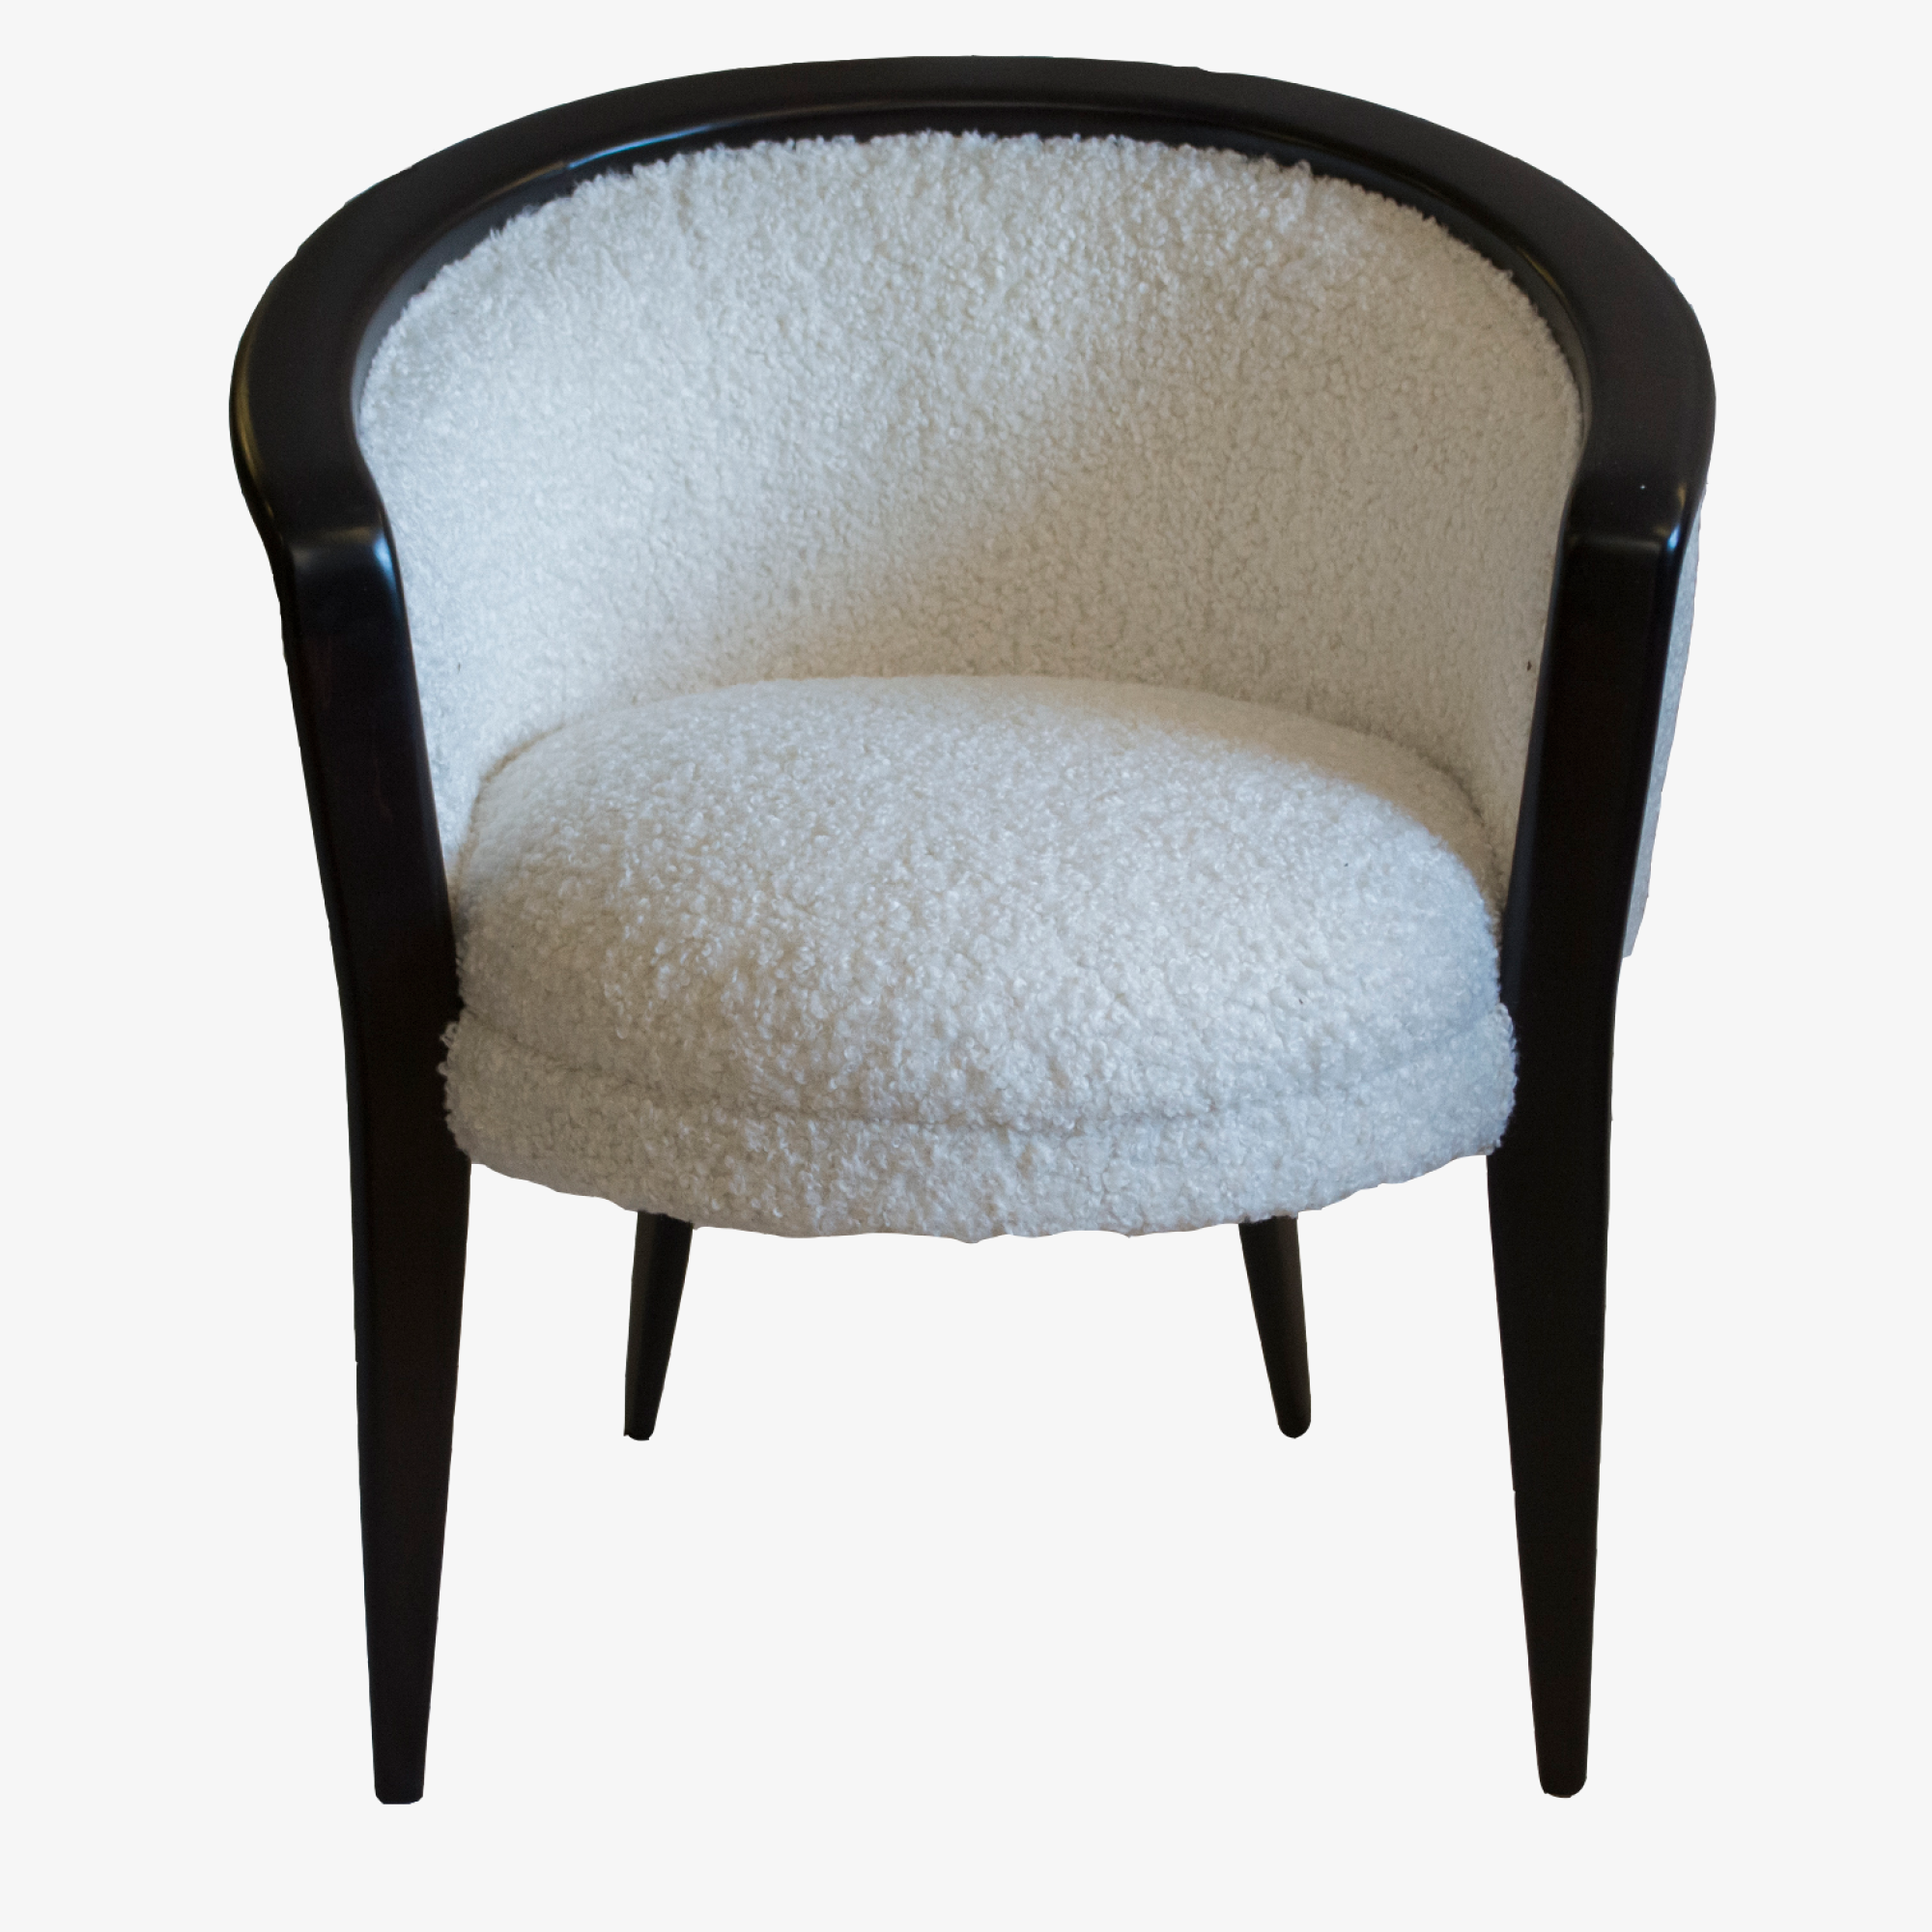 Bespoke French Barrel Chairs in Faux Shearling 3.png